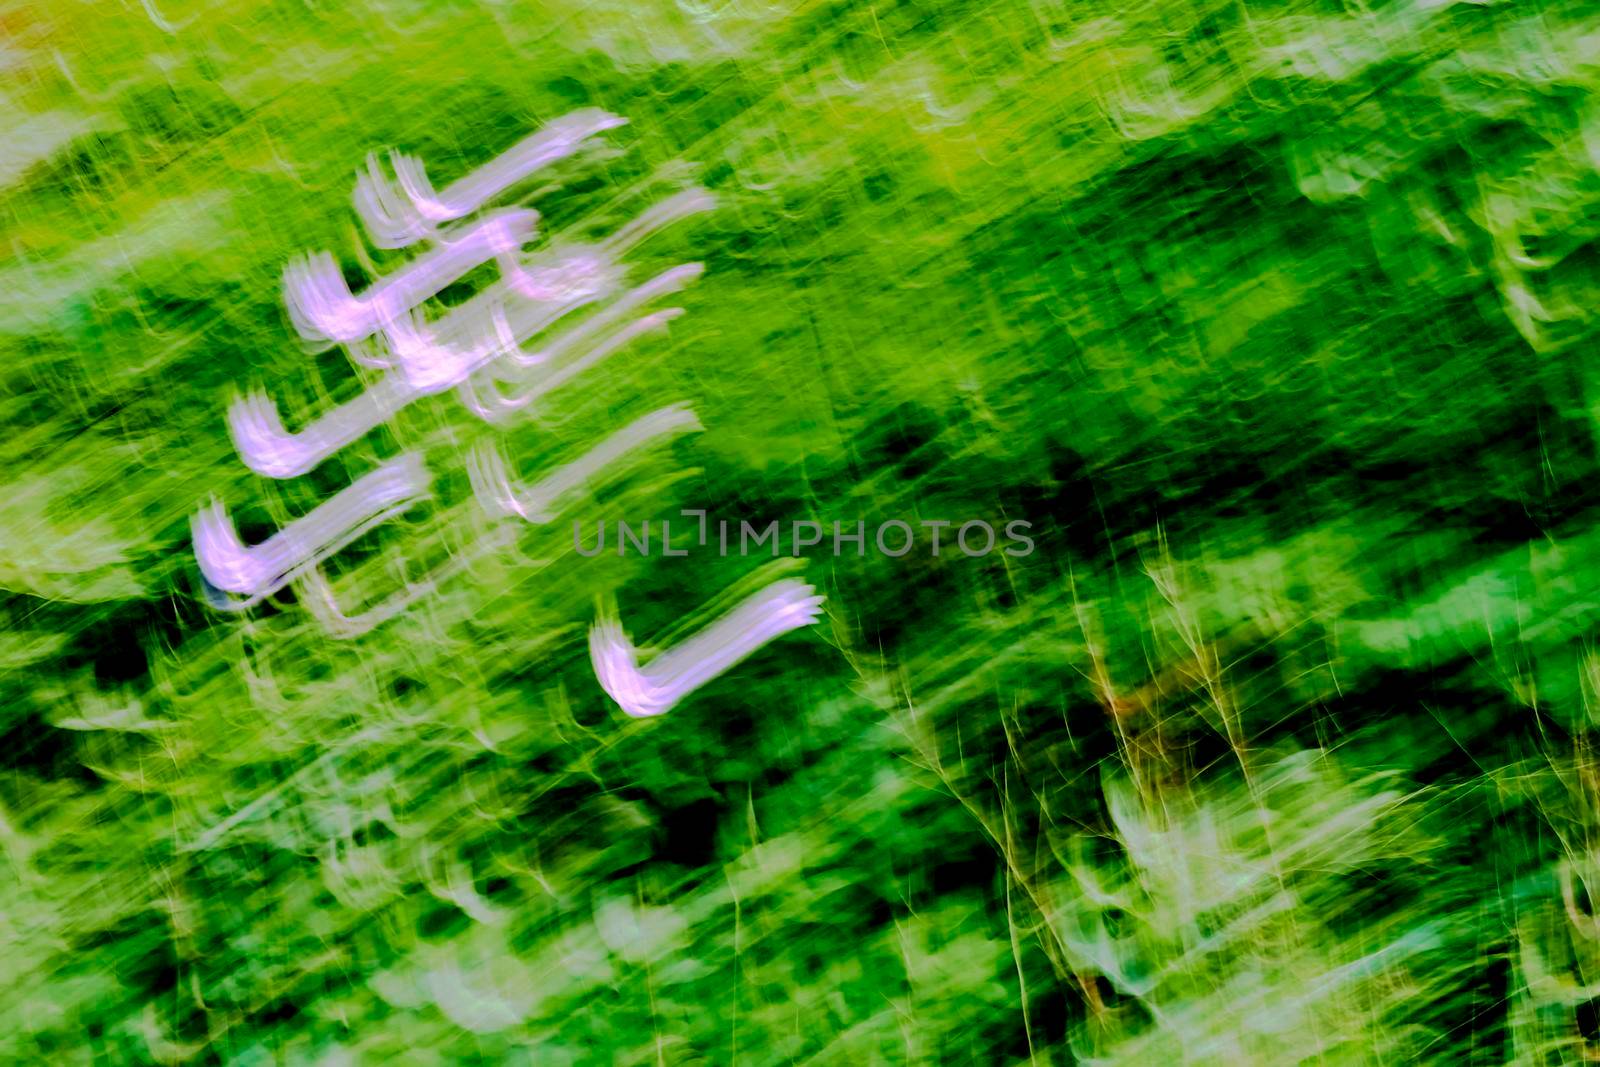 make or become unclear or less distinct. Motion blur photo of pink flowers and green grass.